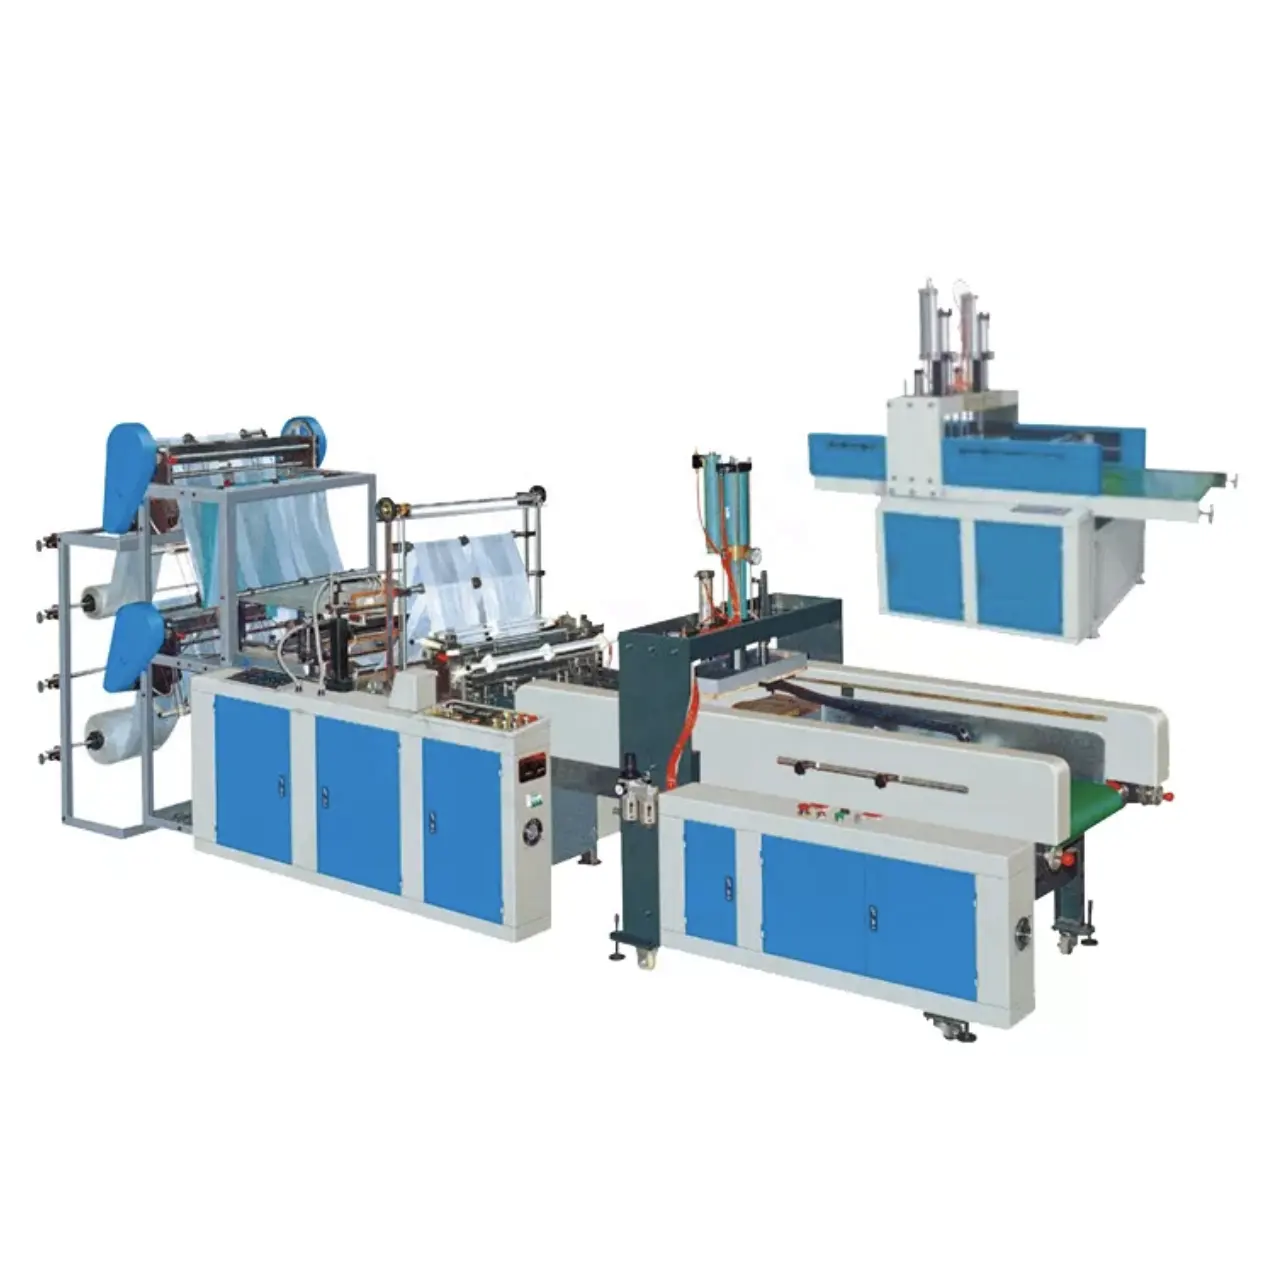 Automatic Heat-sealing &cold-cutting Shopping Garbage Fruit Bread Plastic Food Bags Making Machine Price In Pakistan